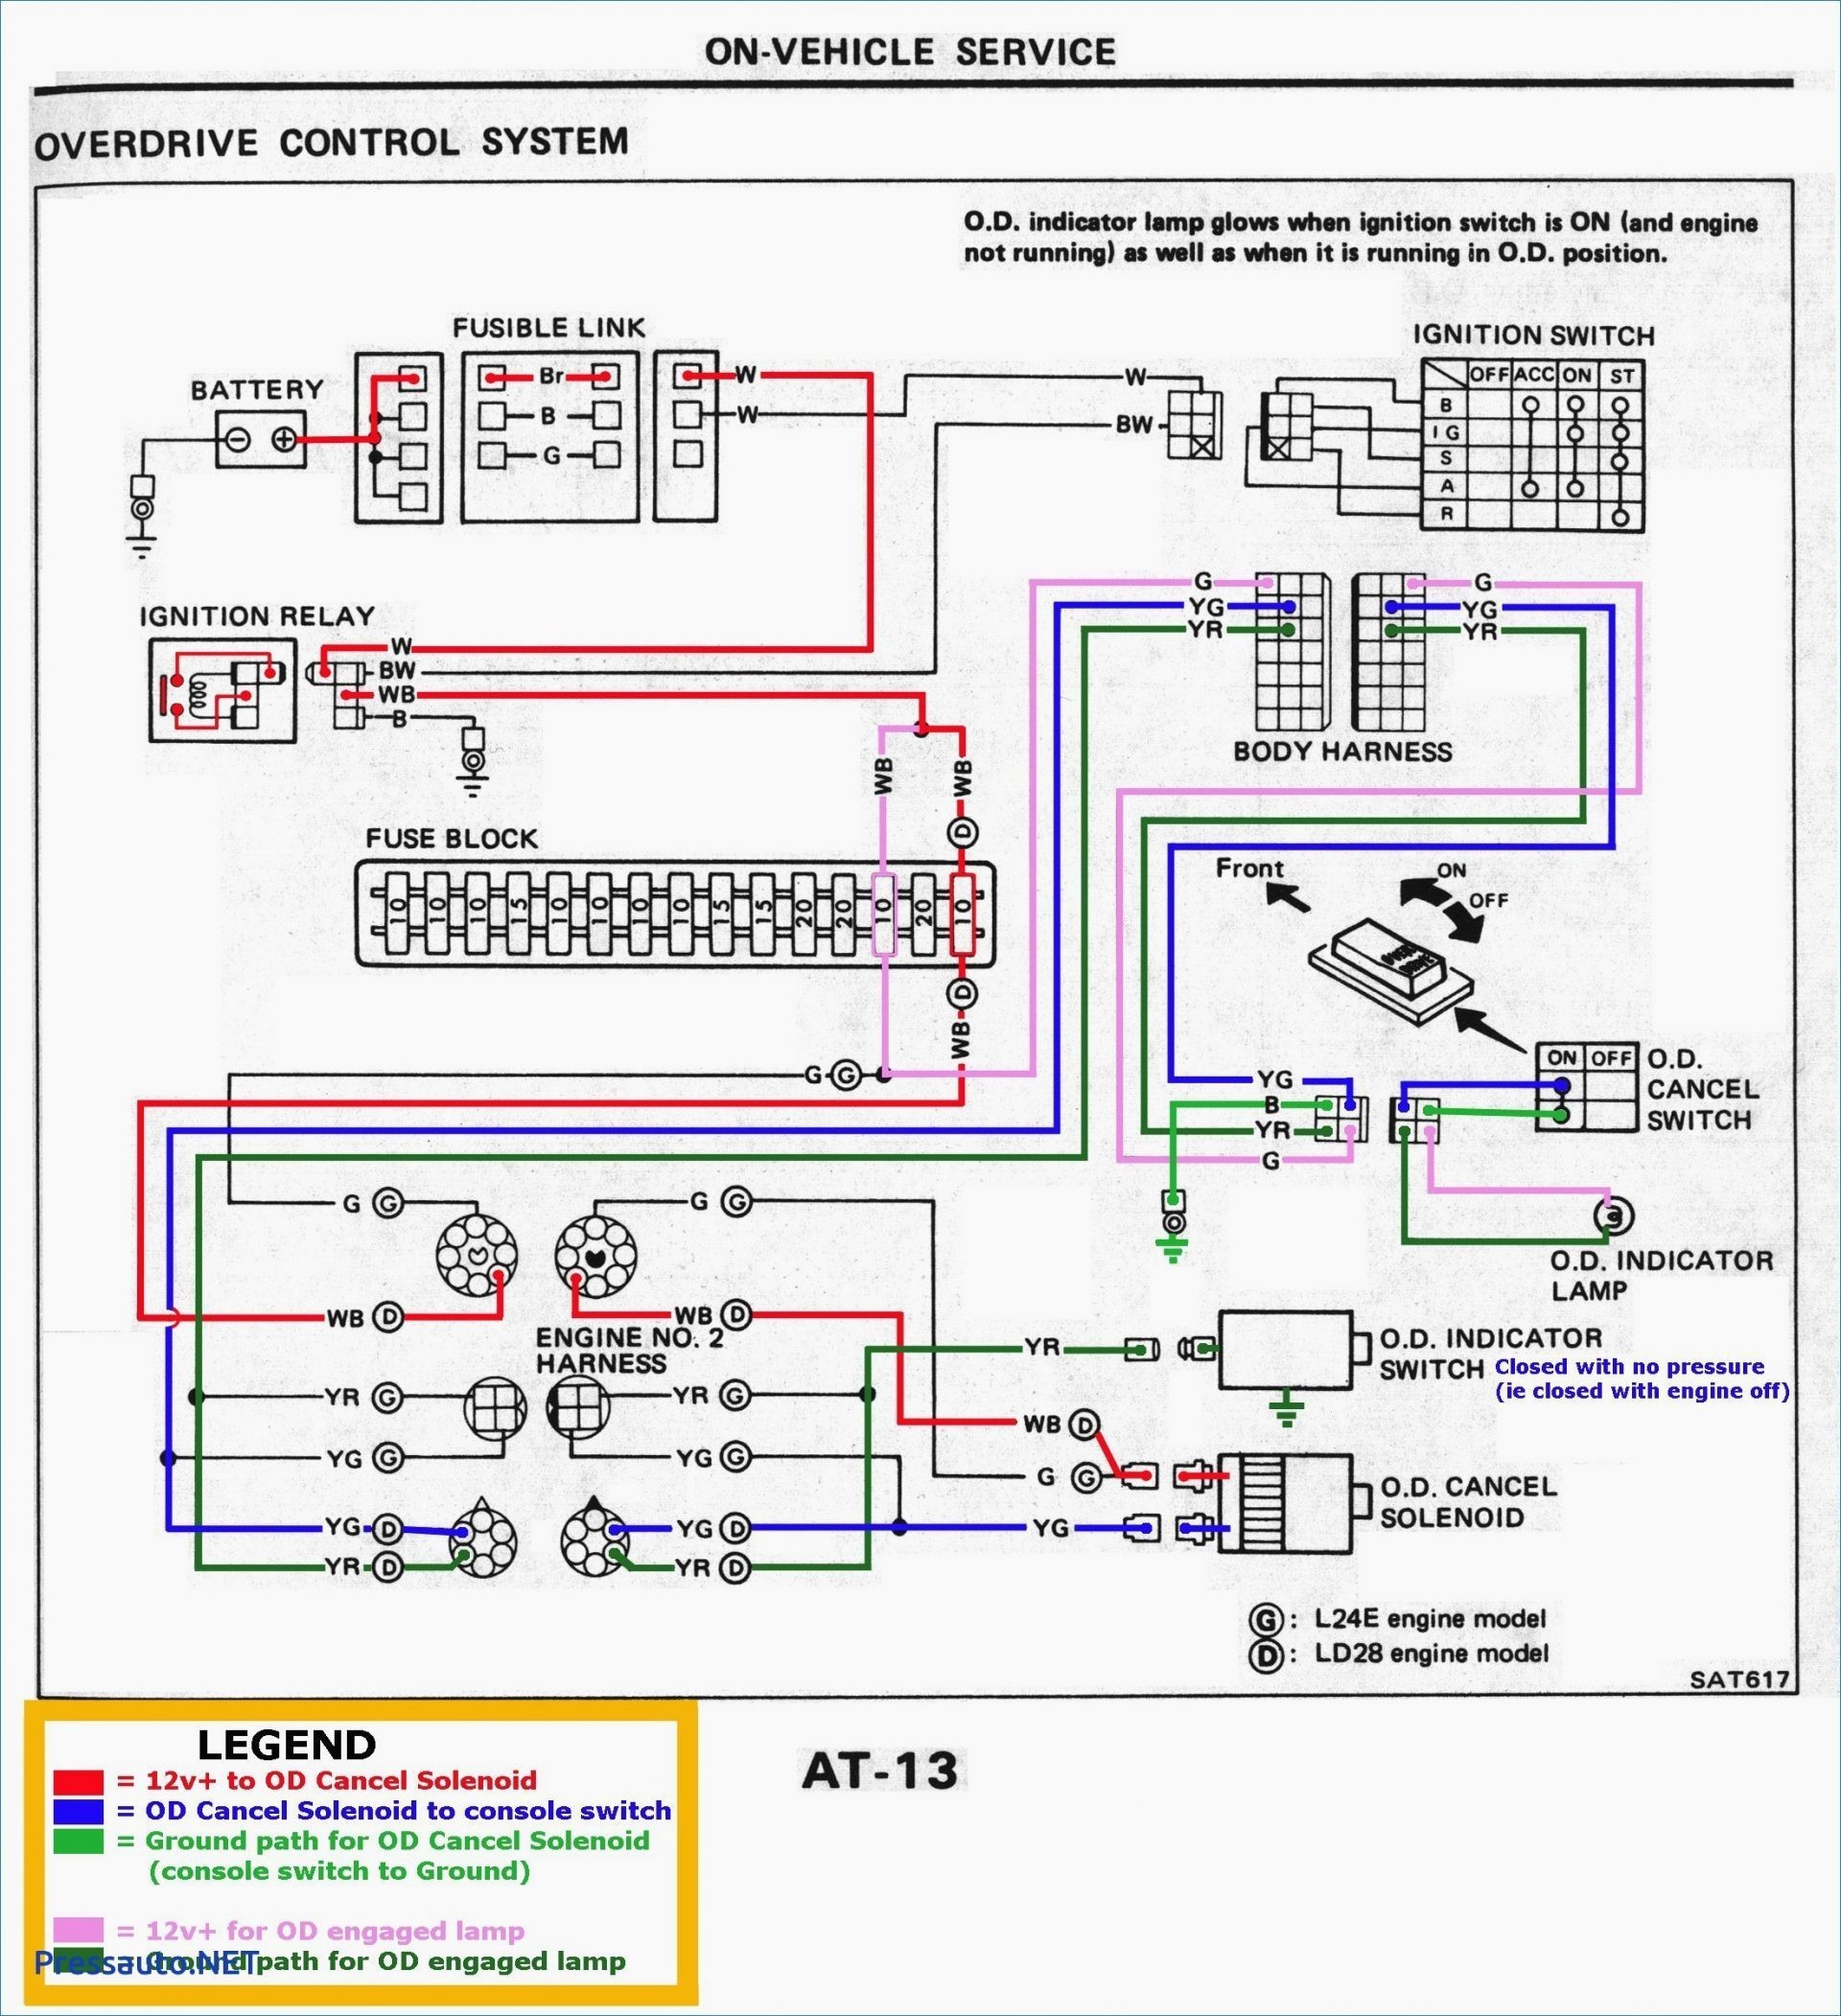 Engine Wiring Harness Diagram Inspirational F Road Light Wiring Diagram with Relay • Electrical Of Engine Wiring Harness Diagram